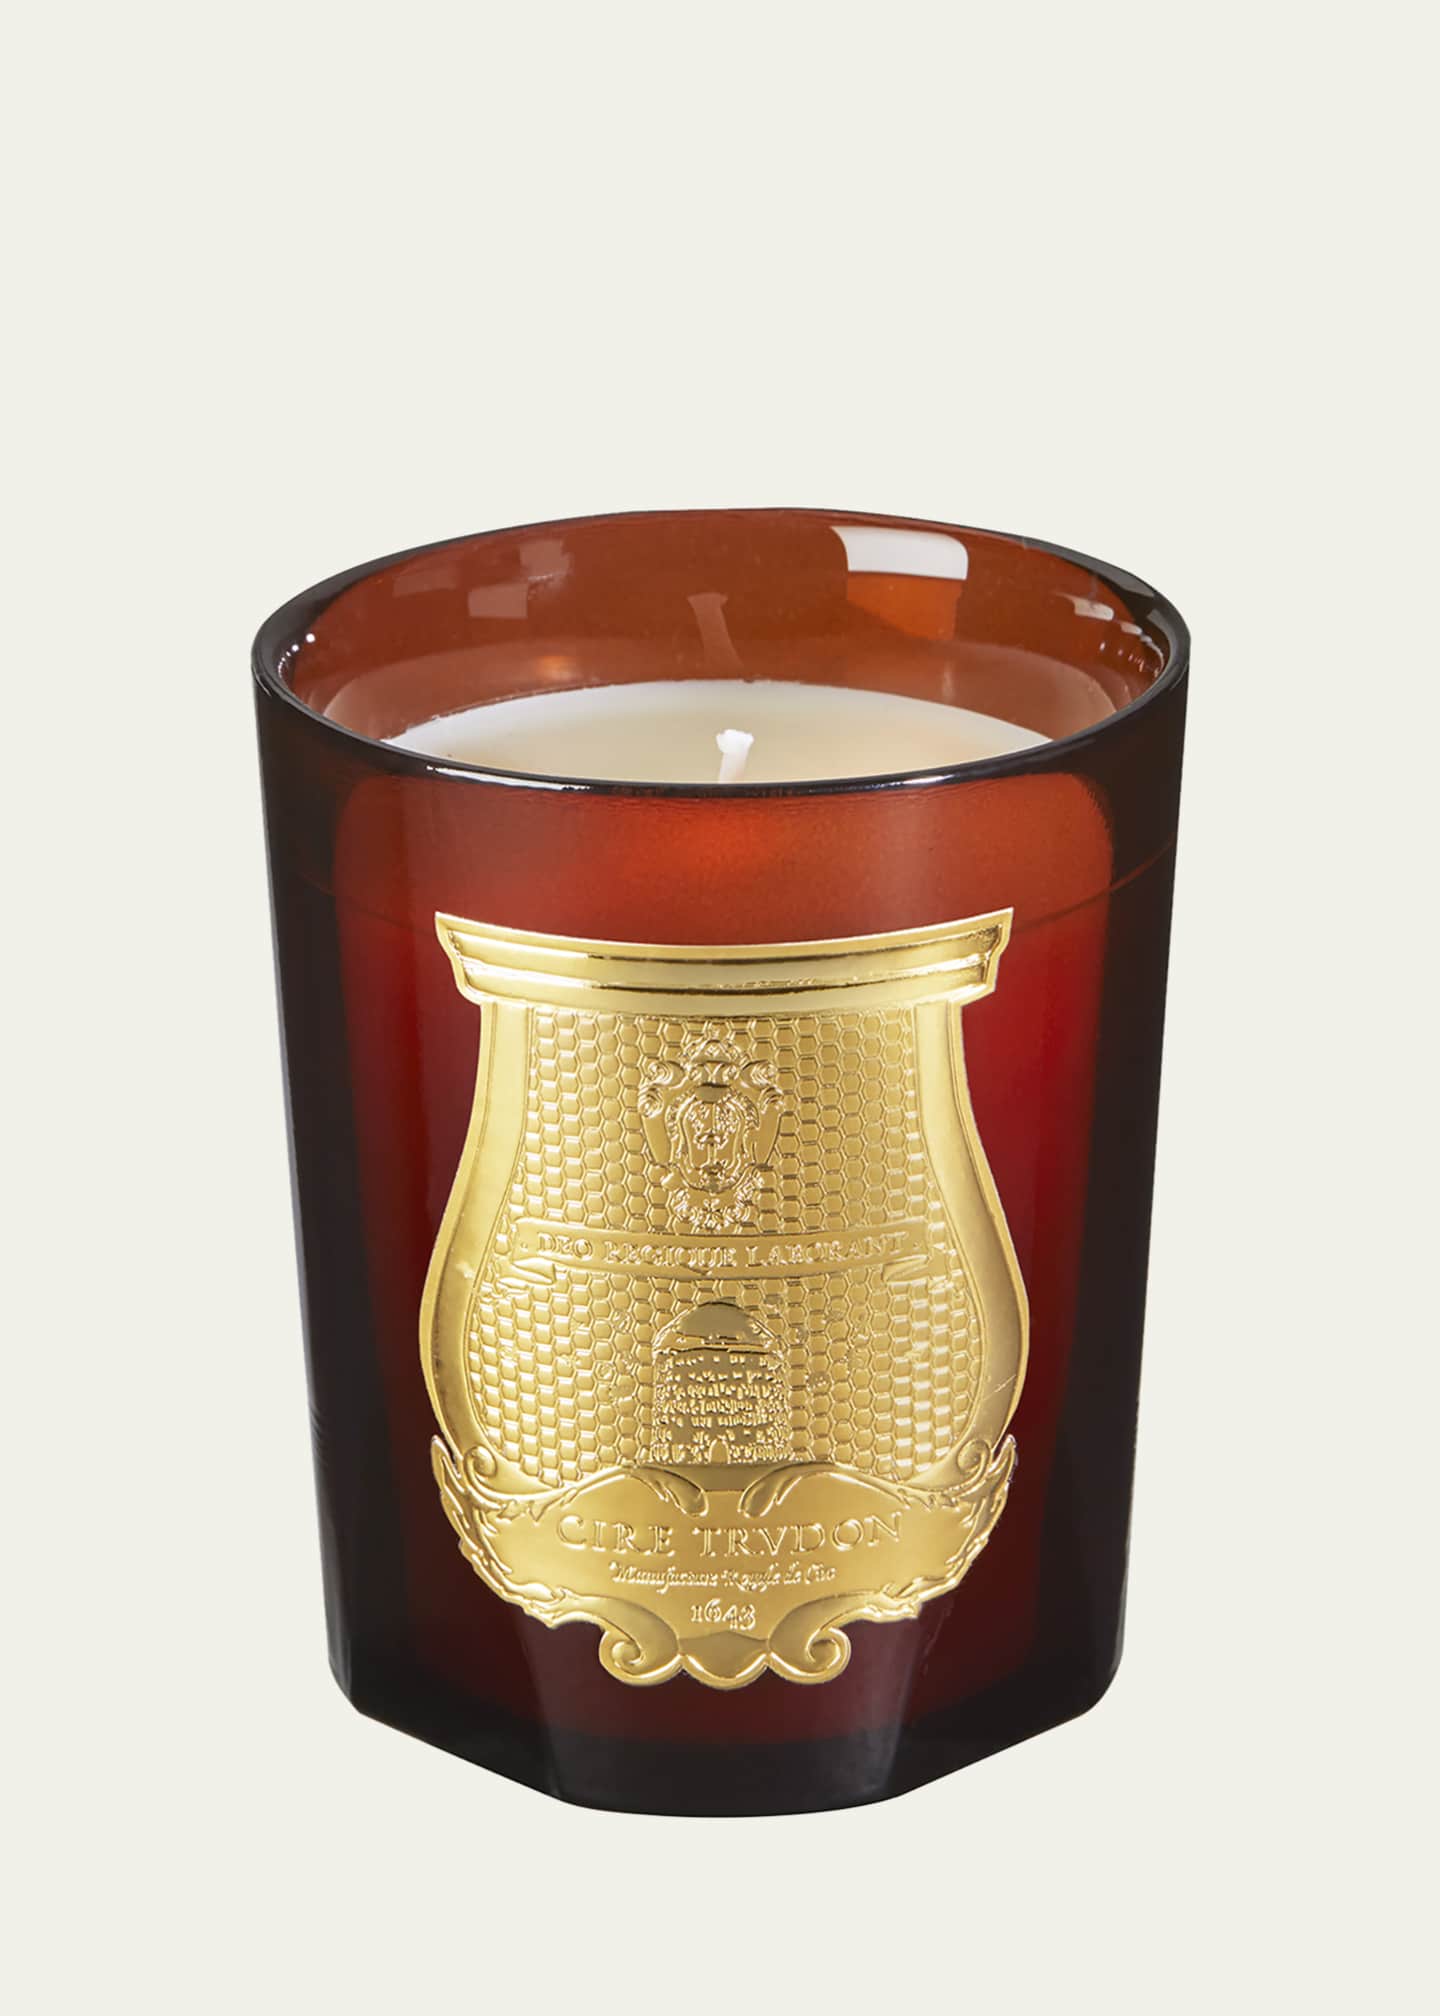 Trudon Cire Classic Candle, Beeswax Absolute - Bergdorf Goodman